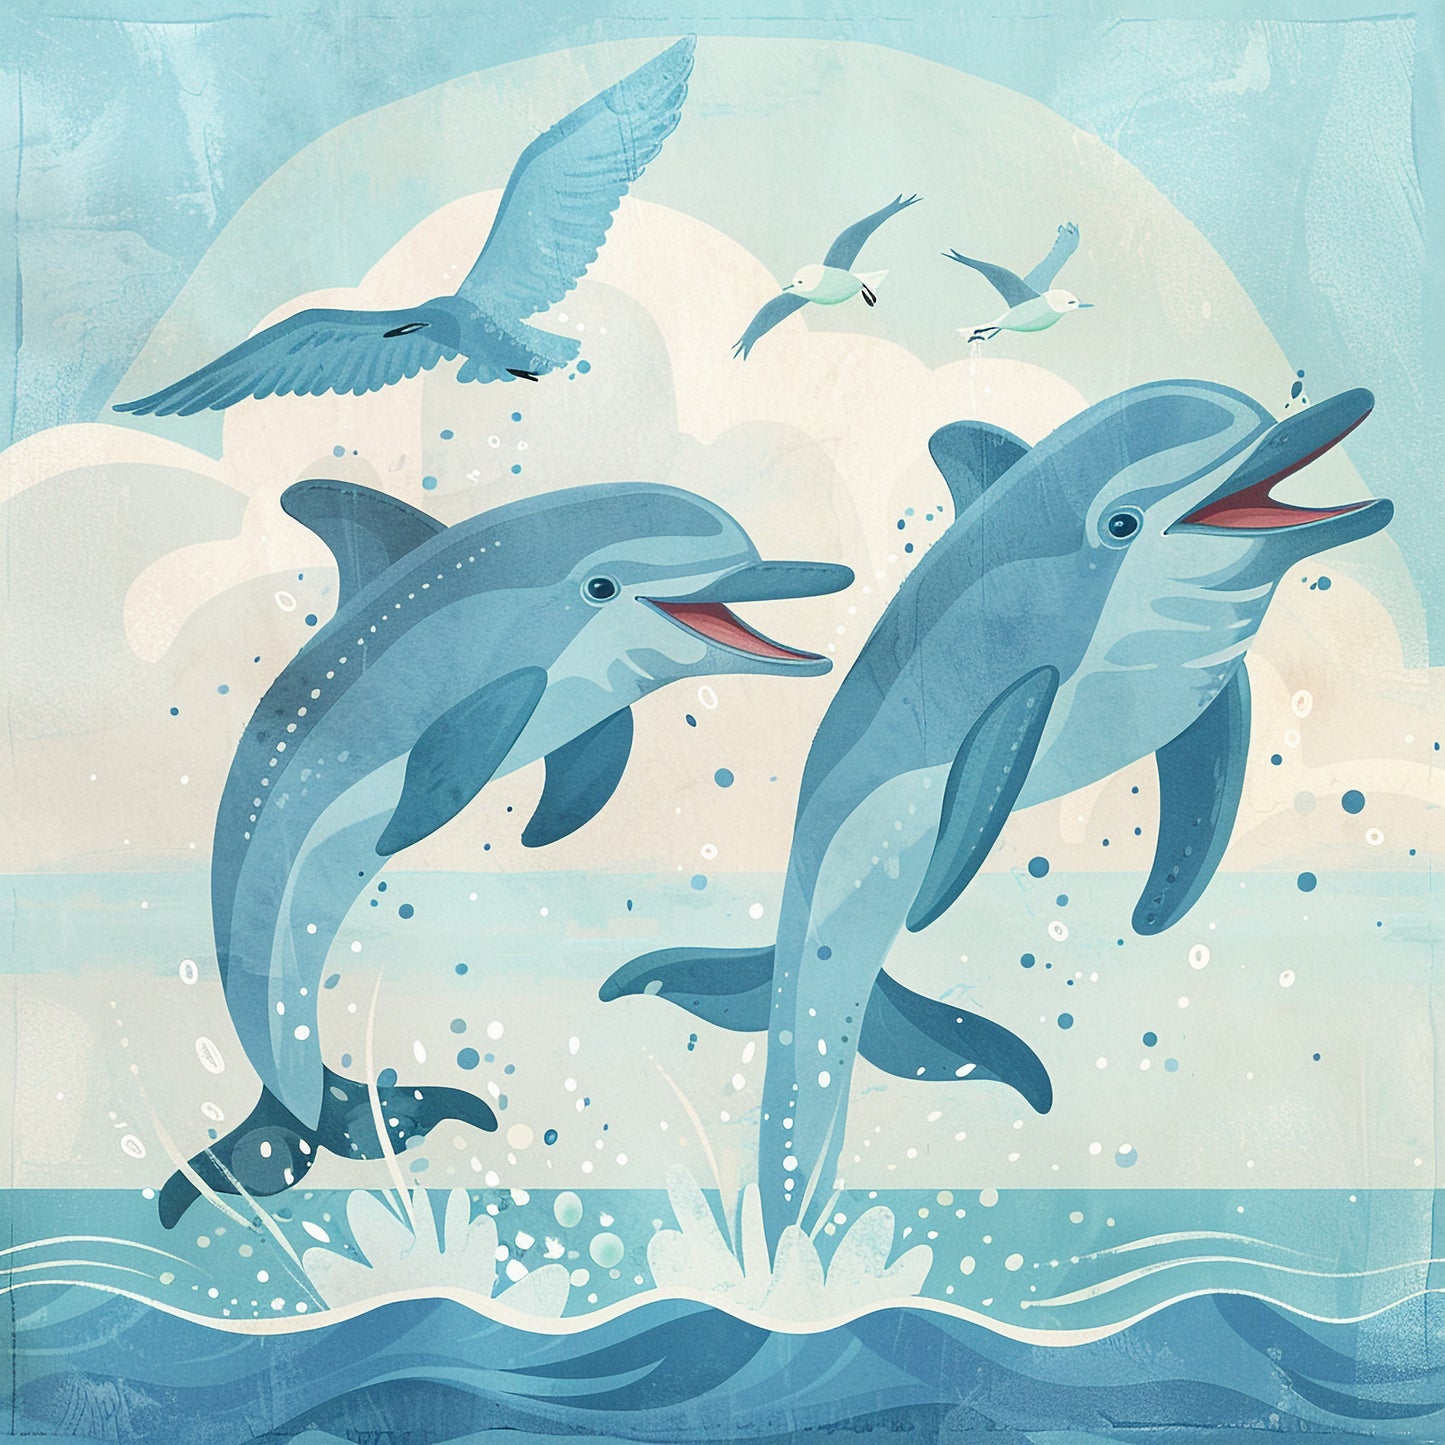 Joyful Dolphins Leaping Out of Water with Birds Flying